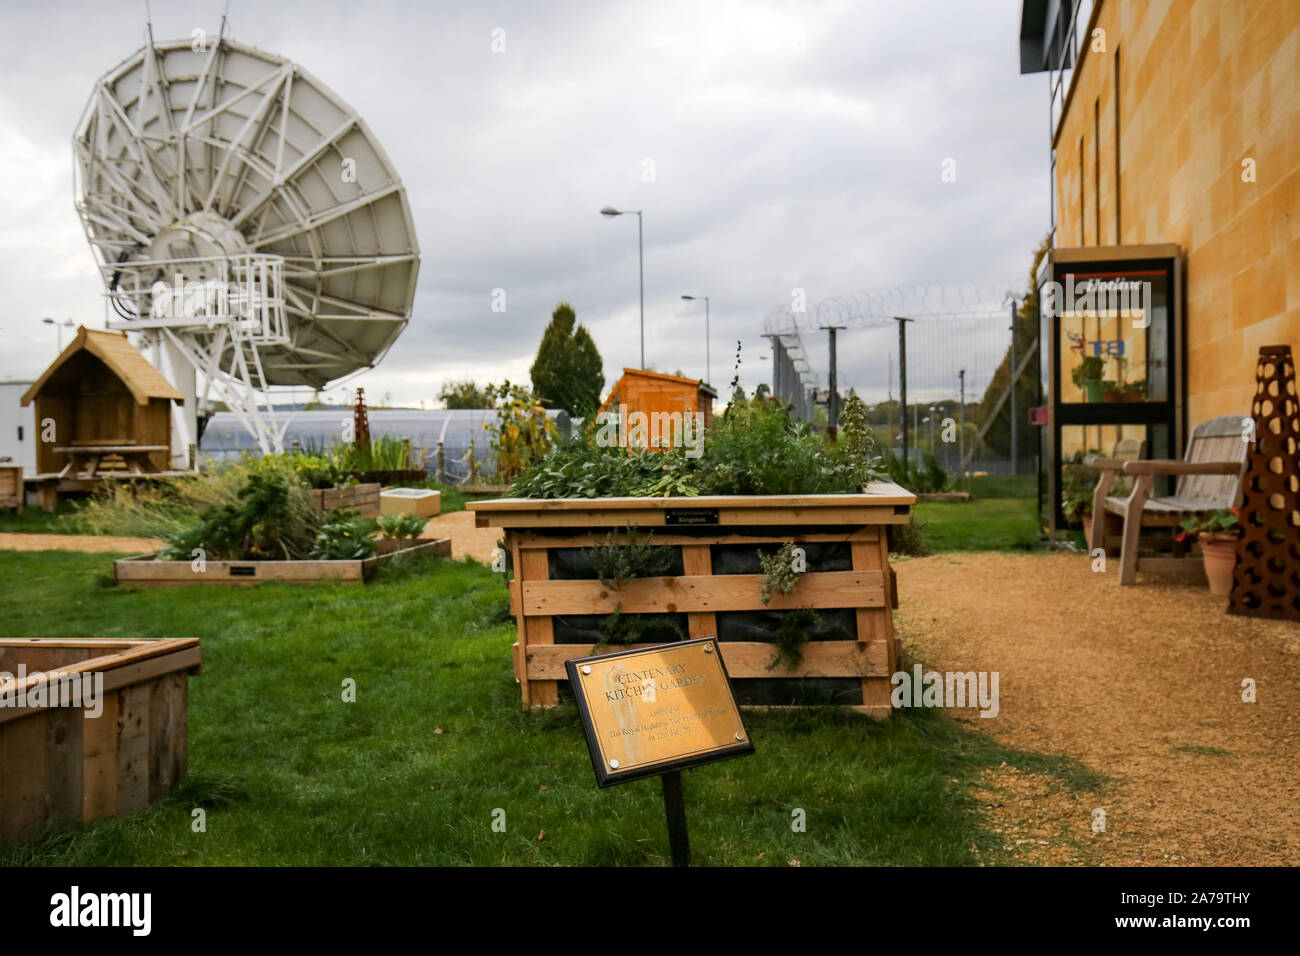 The Centenary Kitchen Garden within Government Communications Headquarters, commonly known as GCHQ, the intelligence and security organisation responsible for providing signals intelligence and information assurance to the government and armed forces of the United Kingdom, based in Cheltenham. Stock Photo